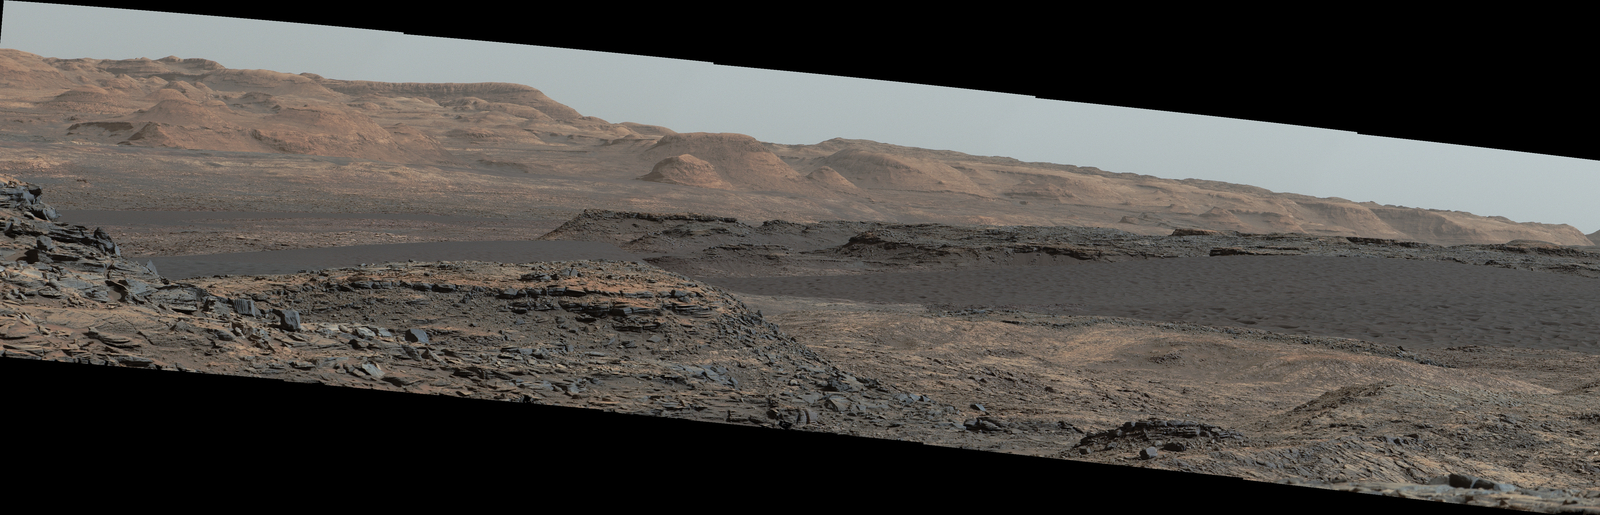 Curiosity Rover Will Study Dunes on Route up Mountain